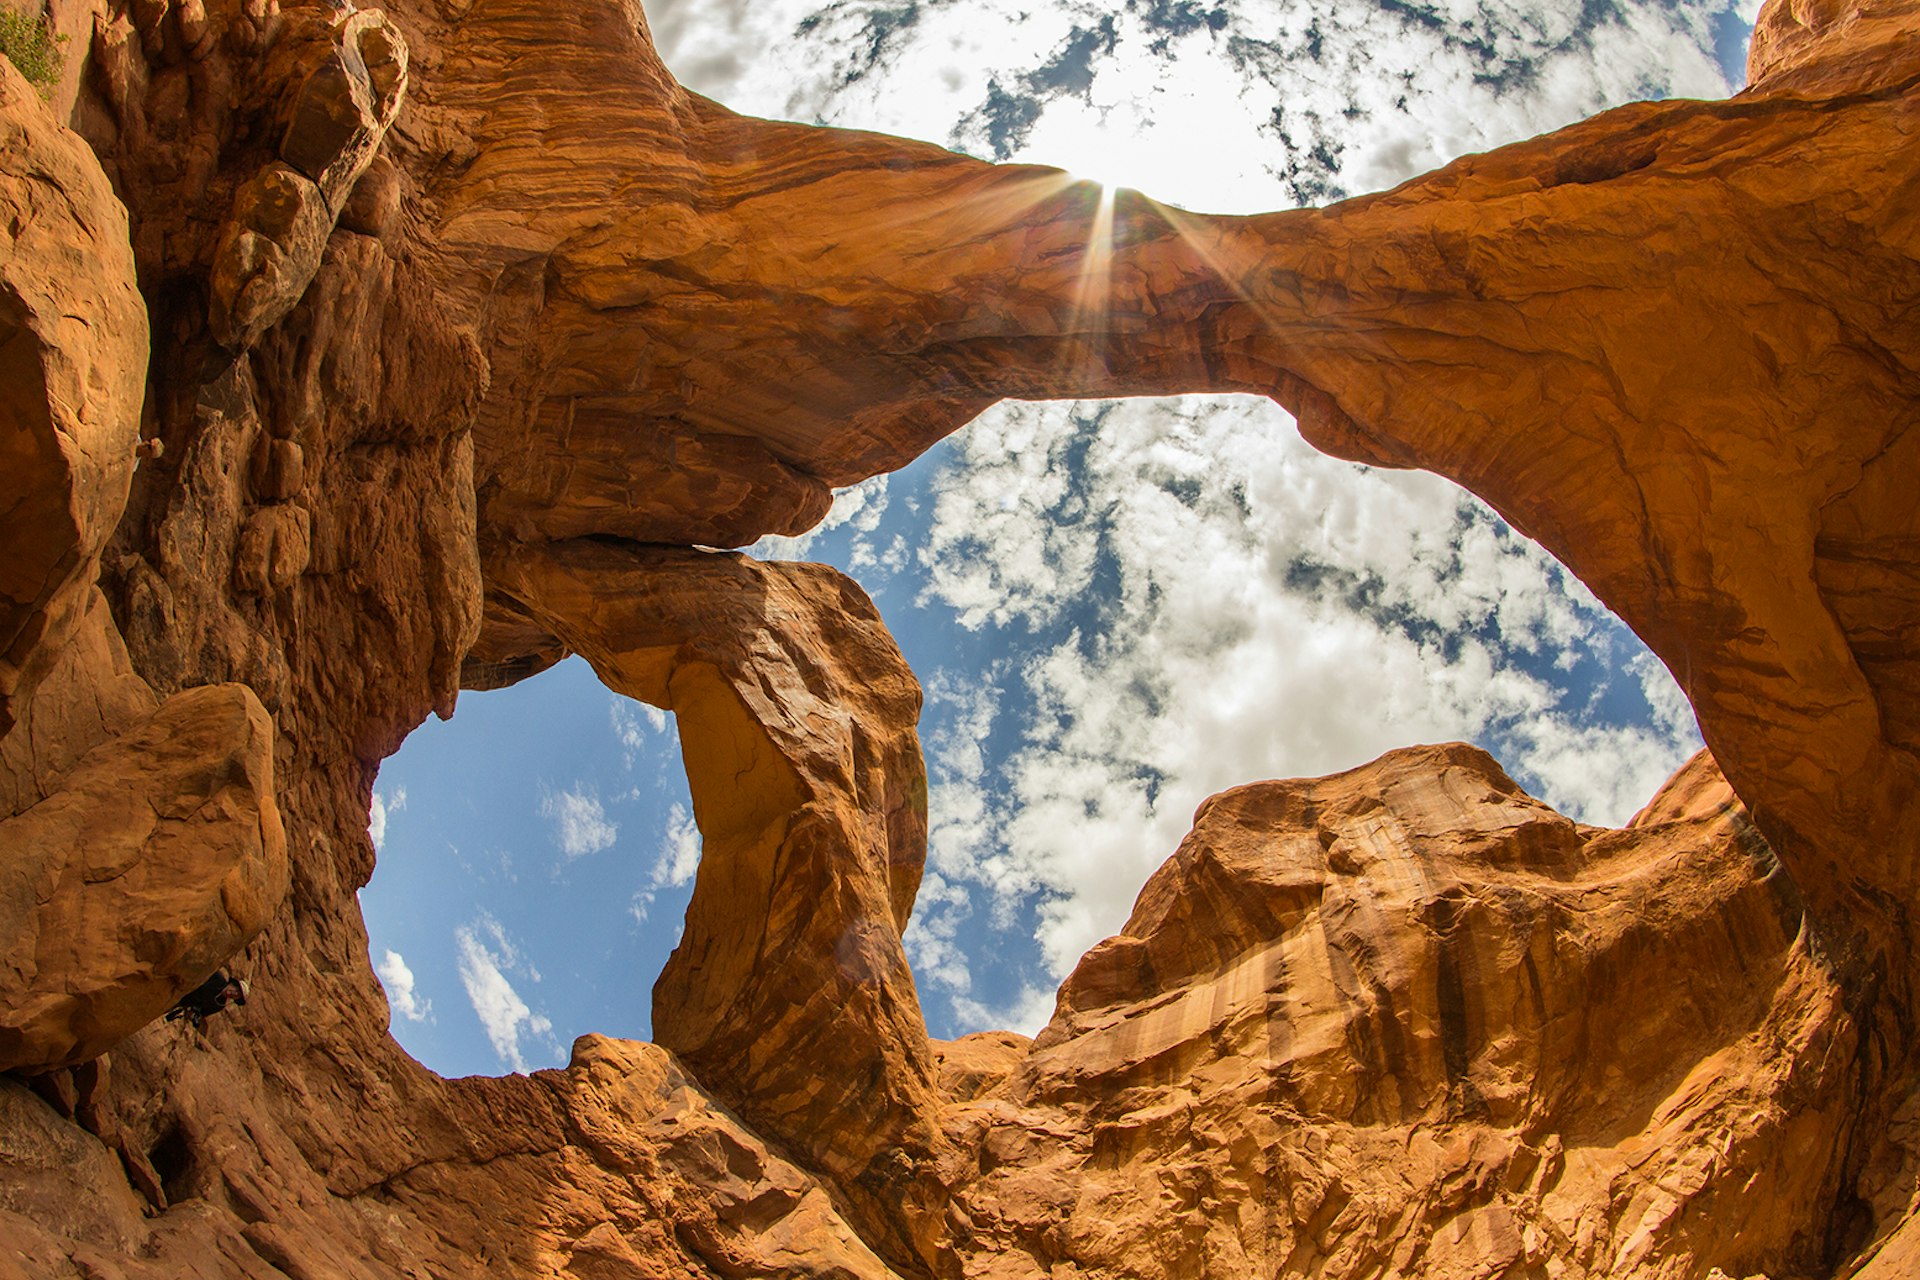 The Double Arch in Arches National Park, Utah. Image by Sylvain L. / CC BY 2.0